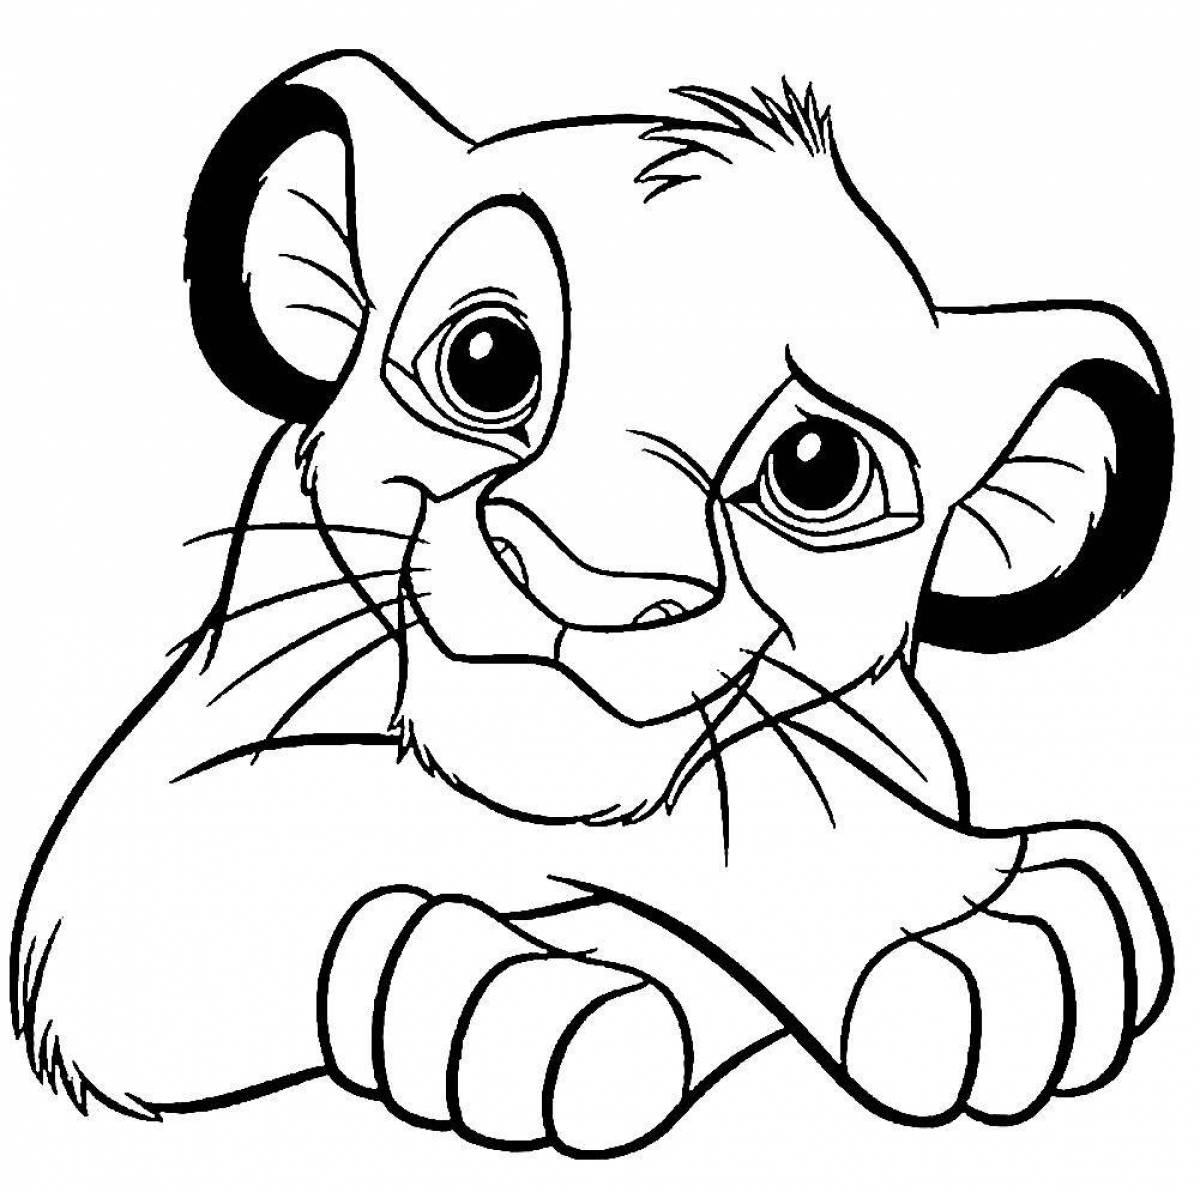 Colorful simba coloring page